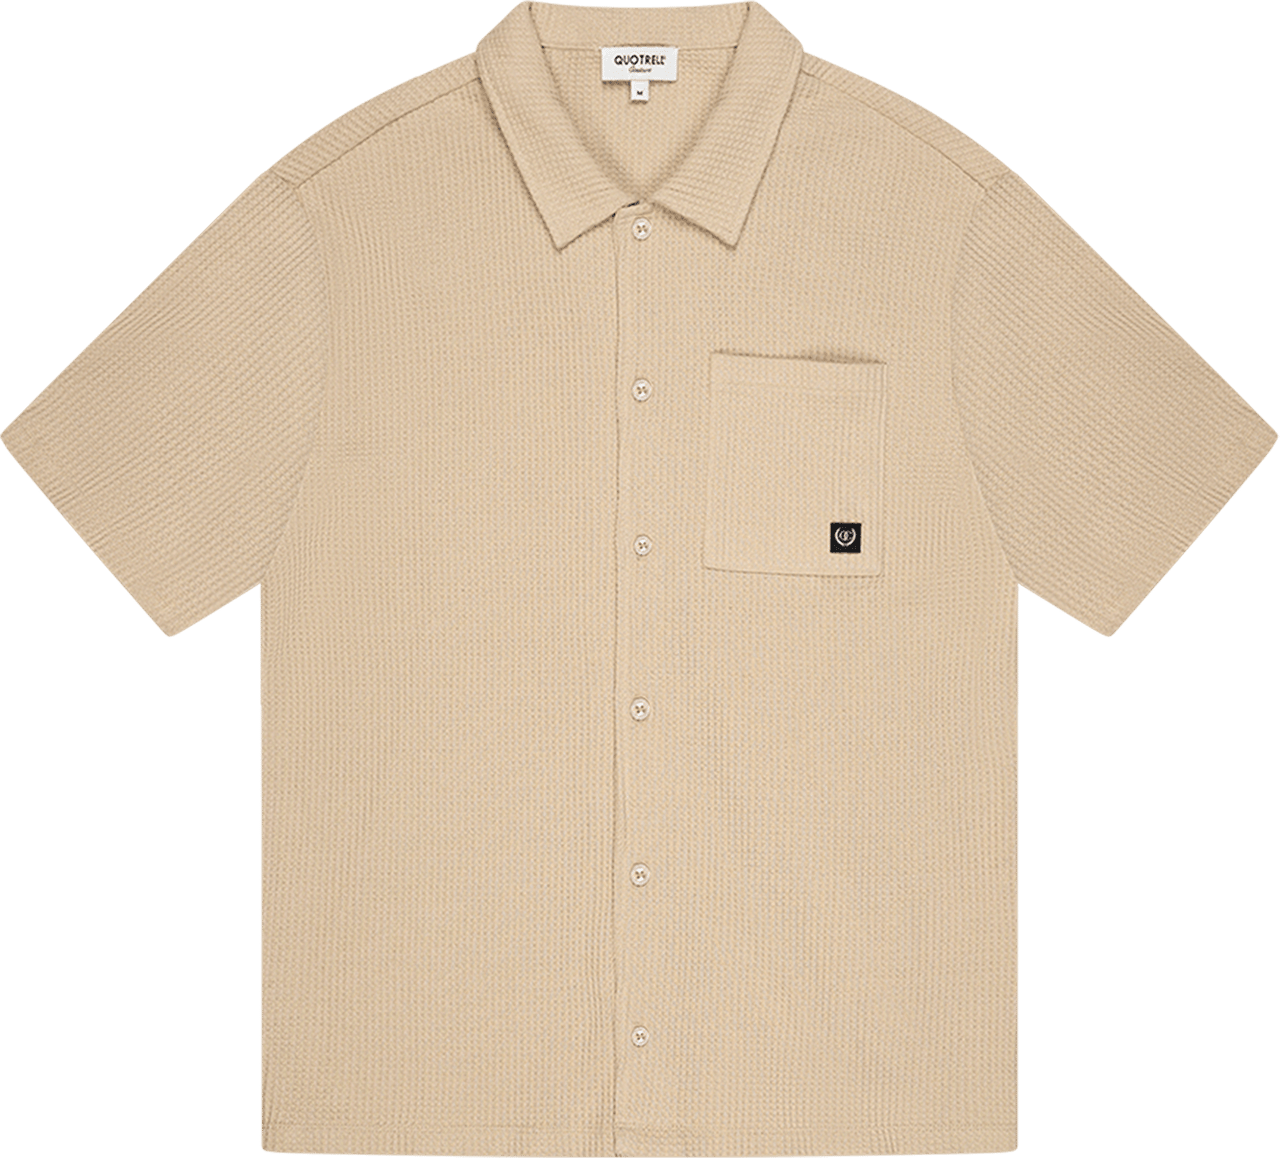 Quotrell Quotrell Couture - Playa Shirt | Beige Beige